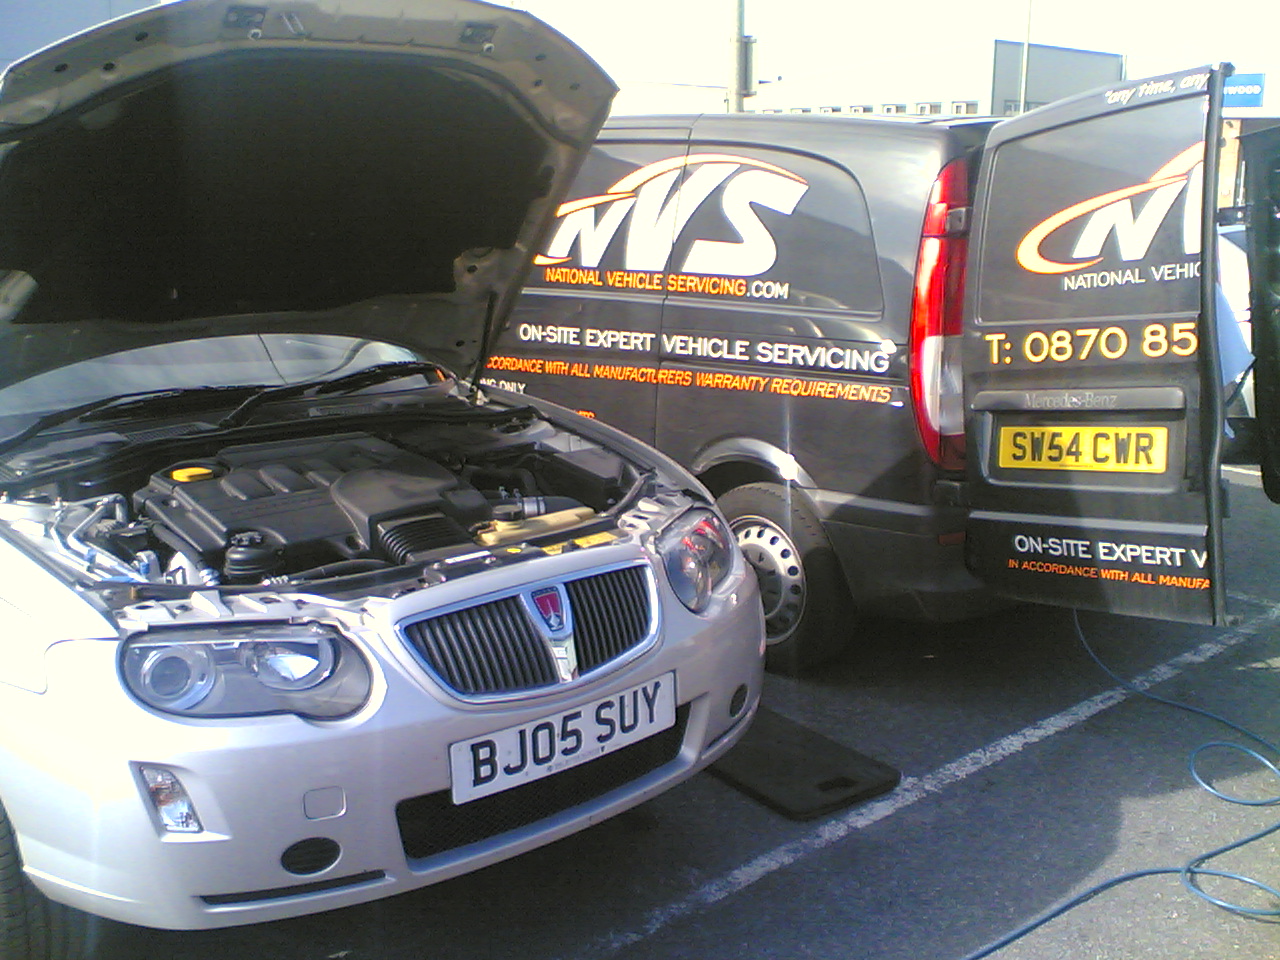 MG servicing in Berkshire